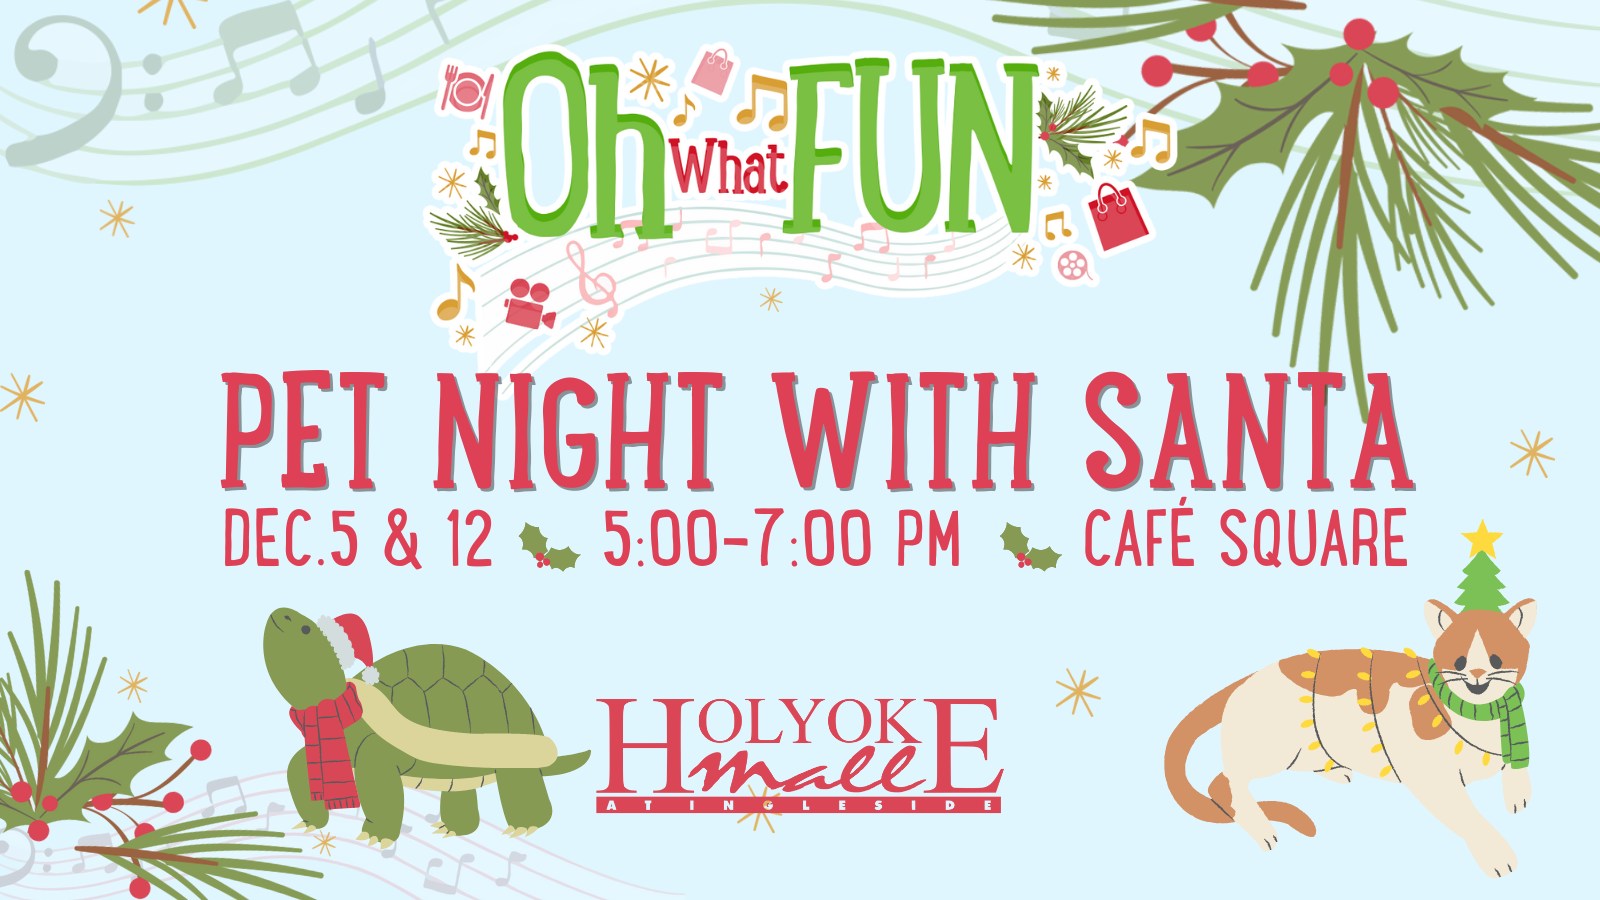 Pet Night with Santa on December 5 and 12 from 5-7PM in Café Square